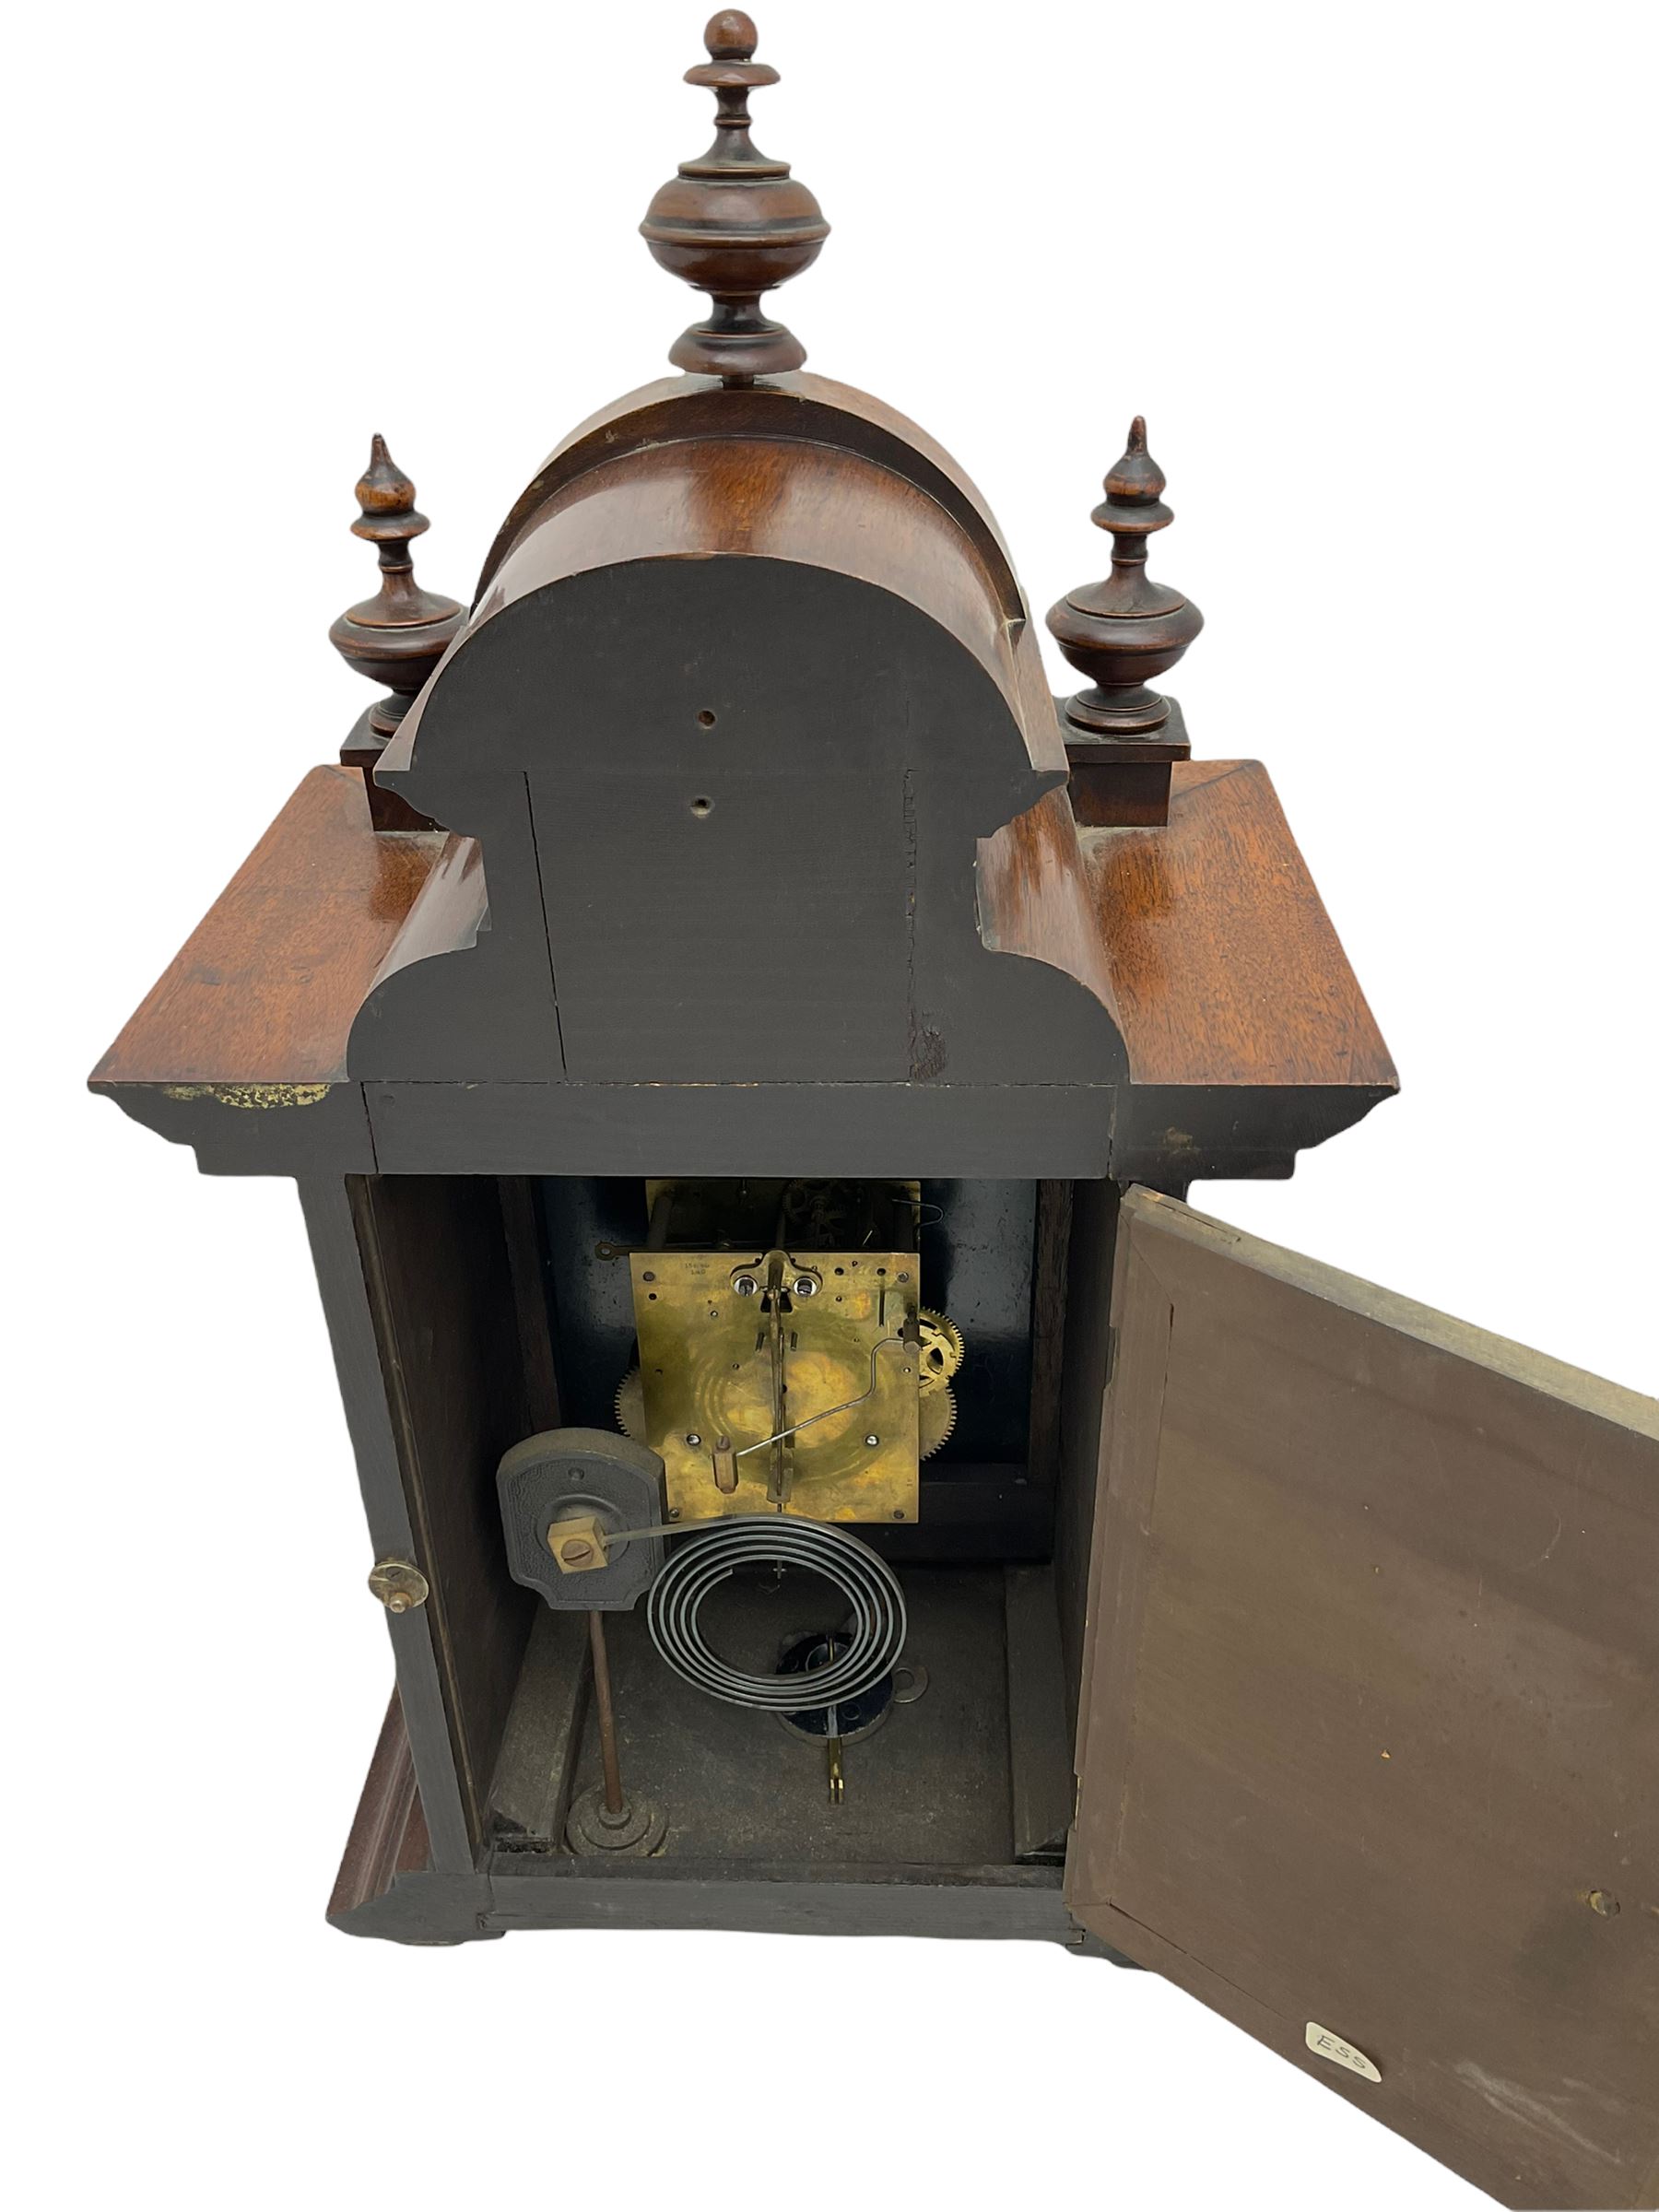 A late 19th century twin train striking mantle clock manufactured in Germany by Phillip Hass & Sohn - Image 3 of 4